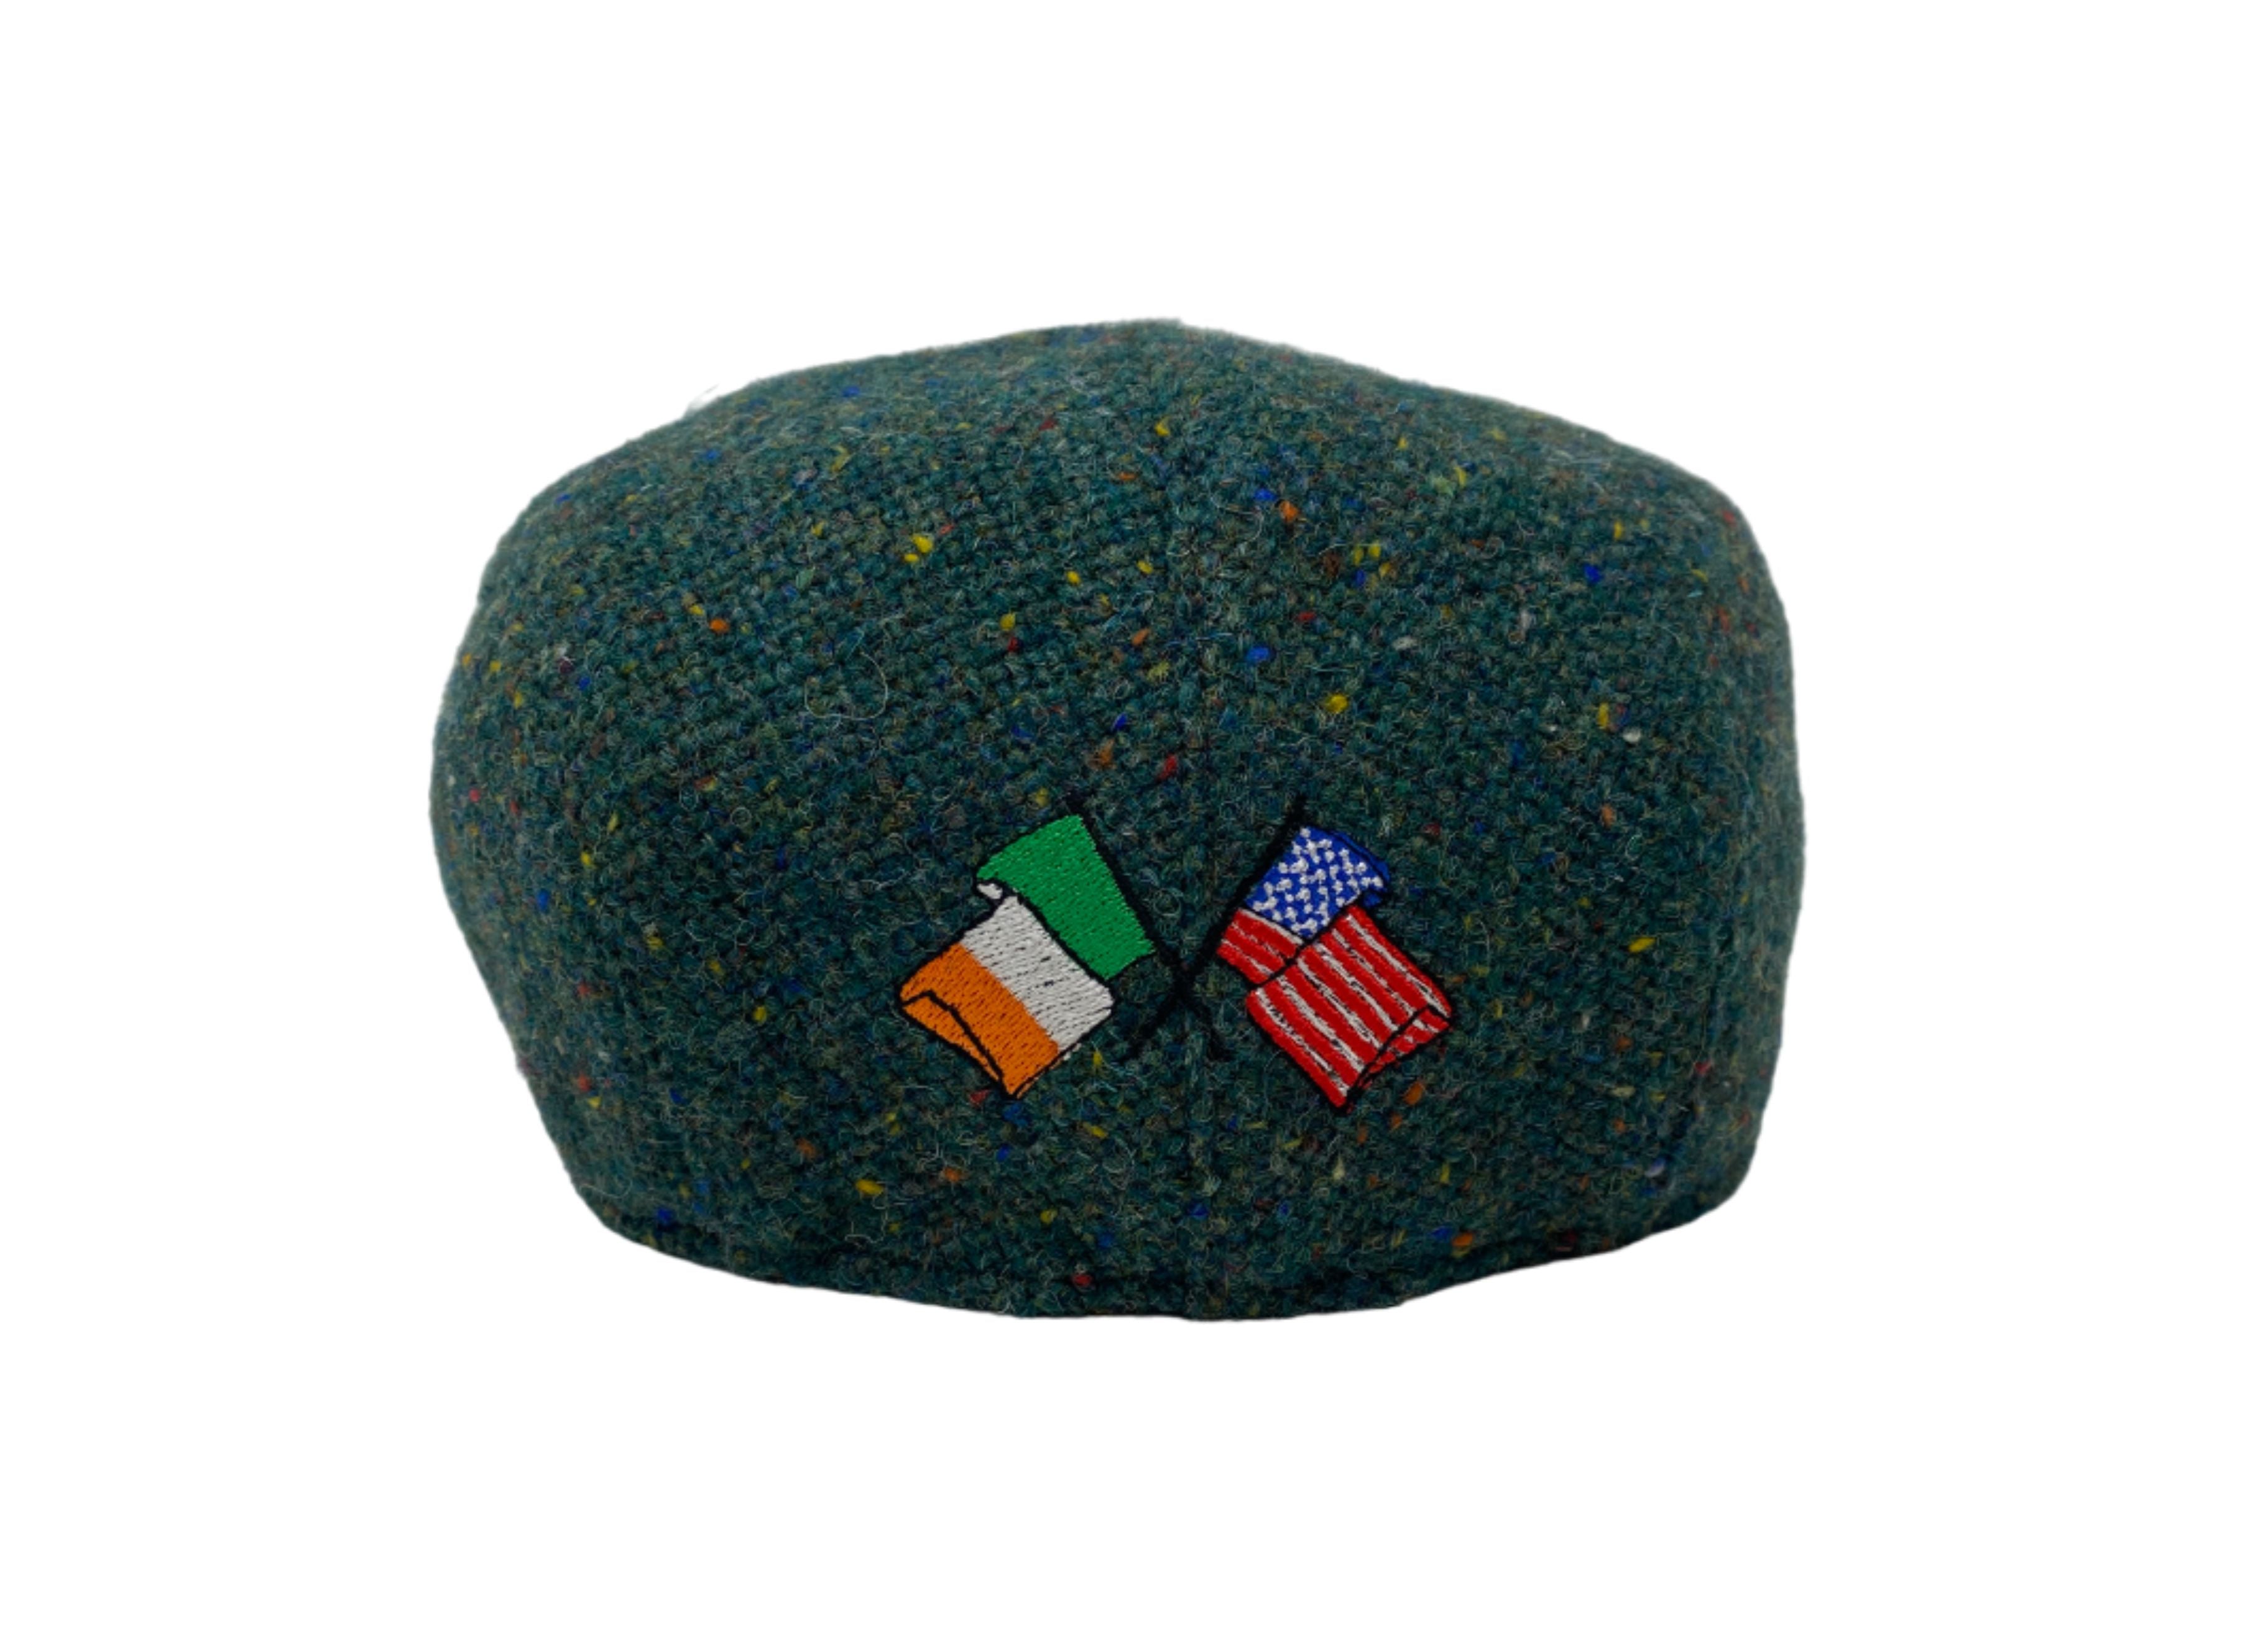 Donegal Touring Cap Tweed Limited Edition